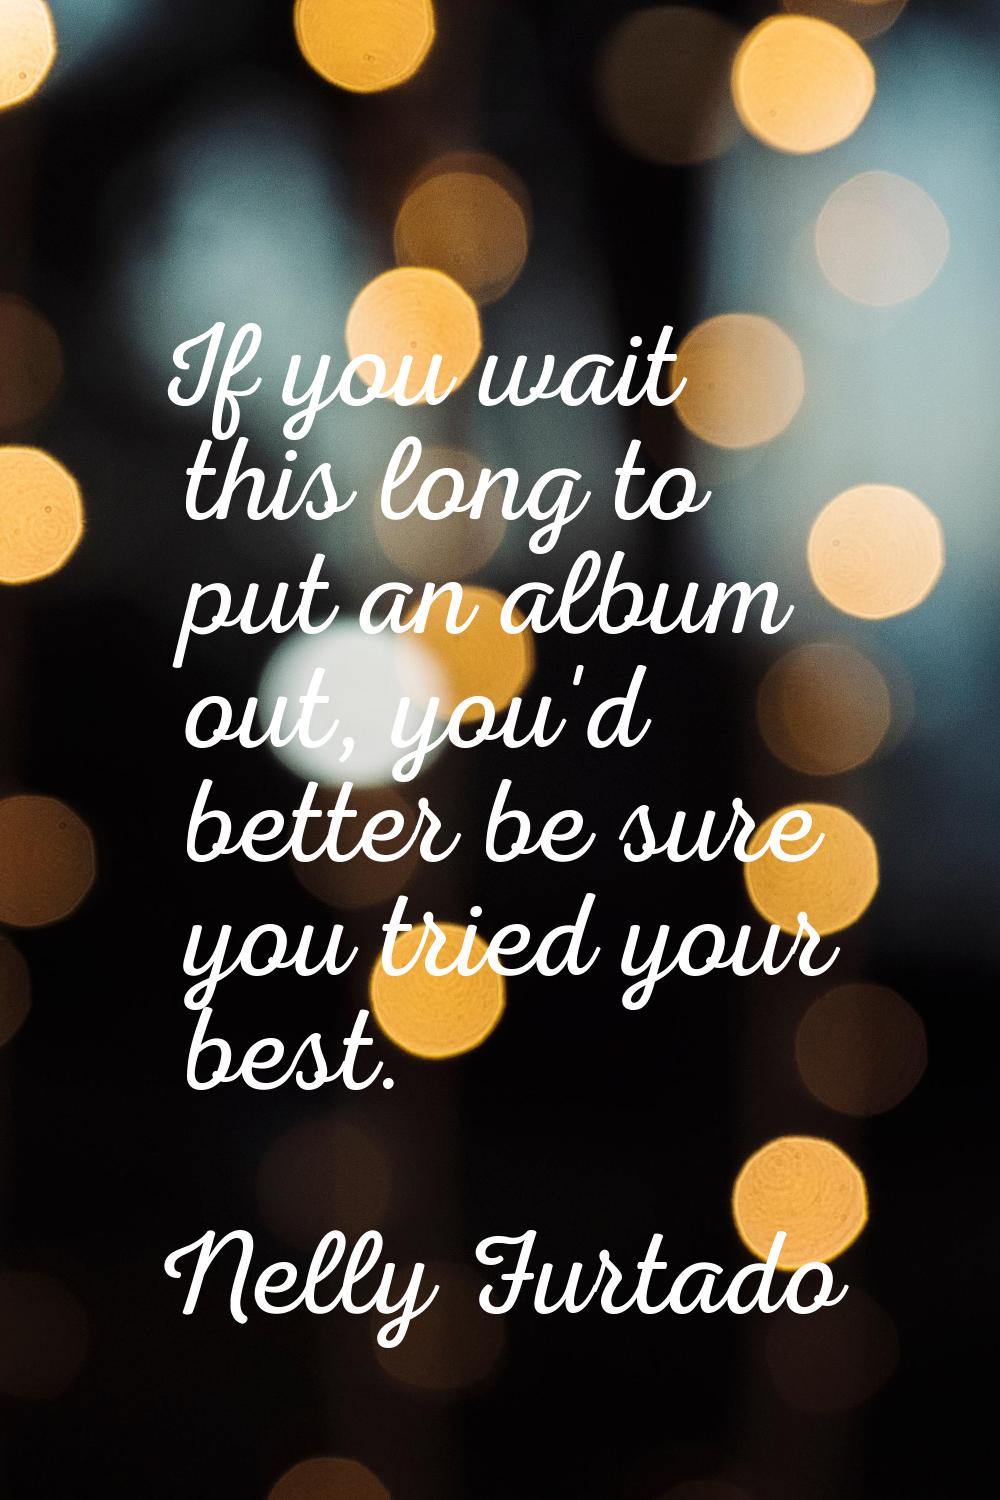 If you wait this long to put an album out, you'd better be sure you tried your best.